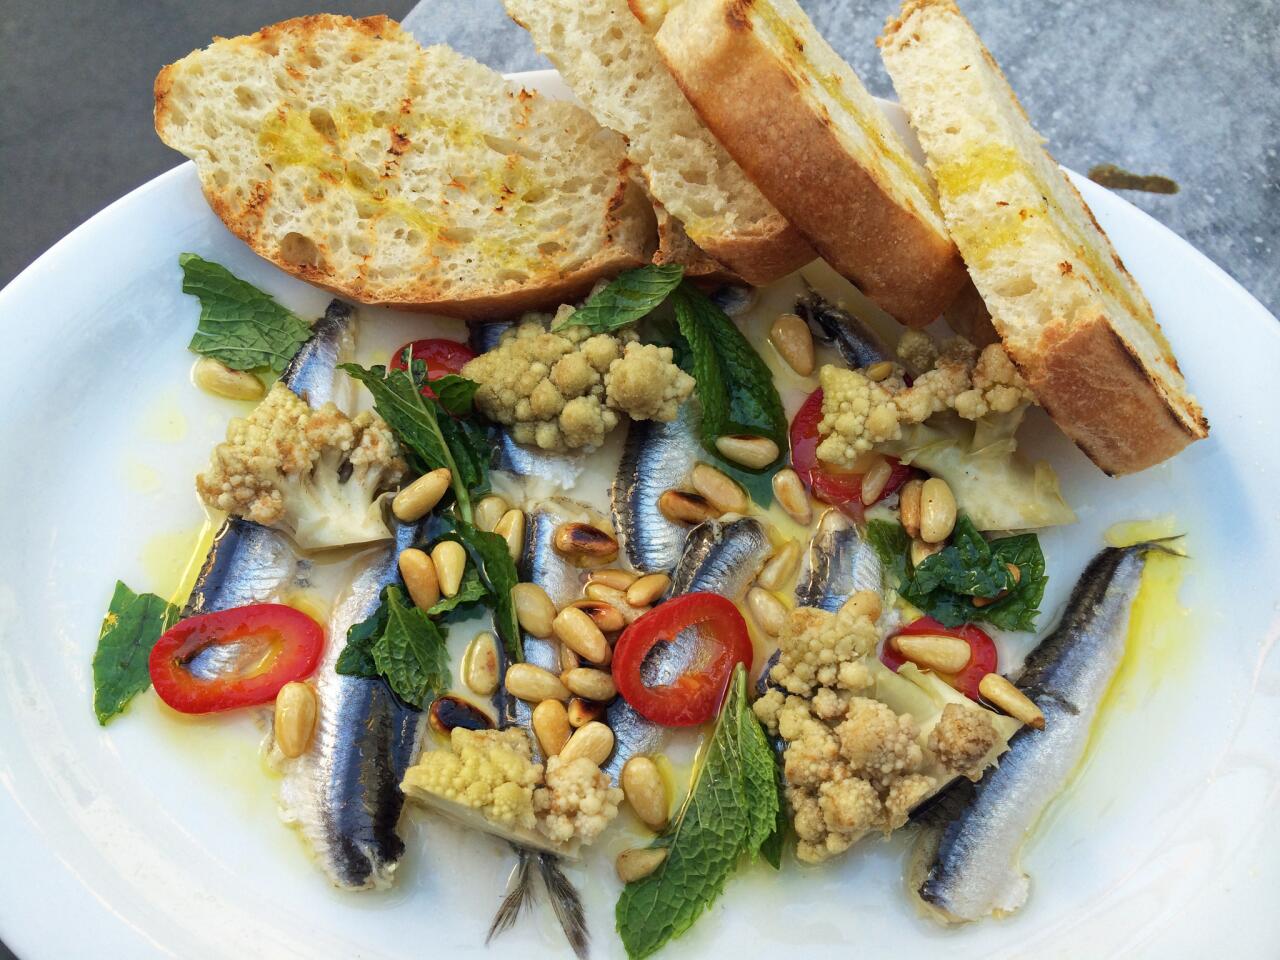 A plate of anchovies, pine nuts, chiles, pickled Romenesco, mint and grilled bread ($6).